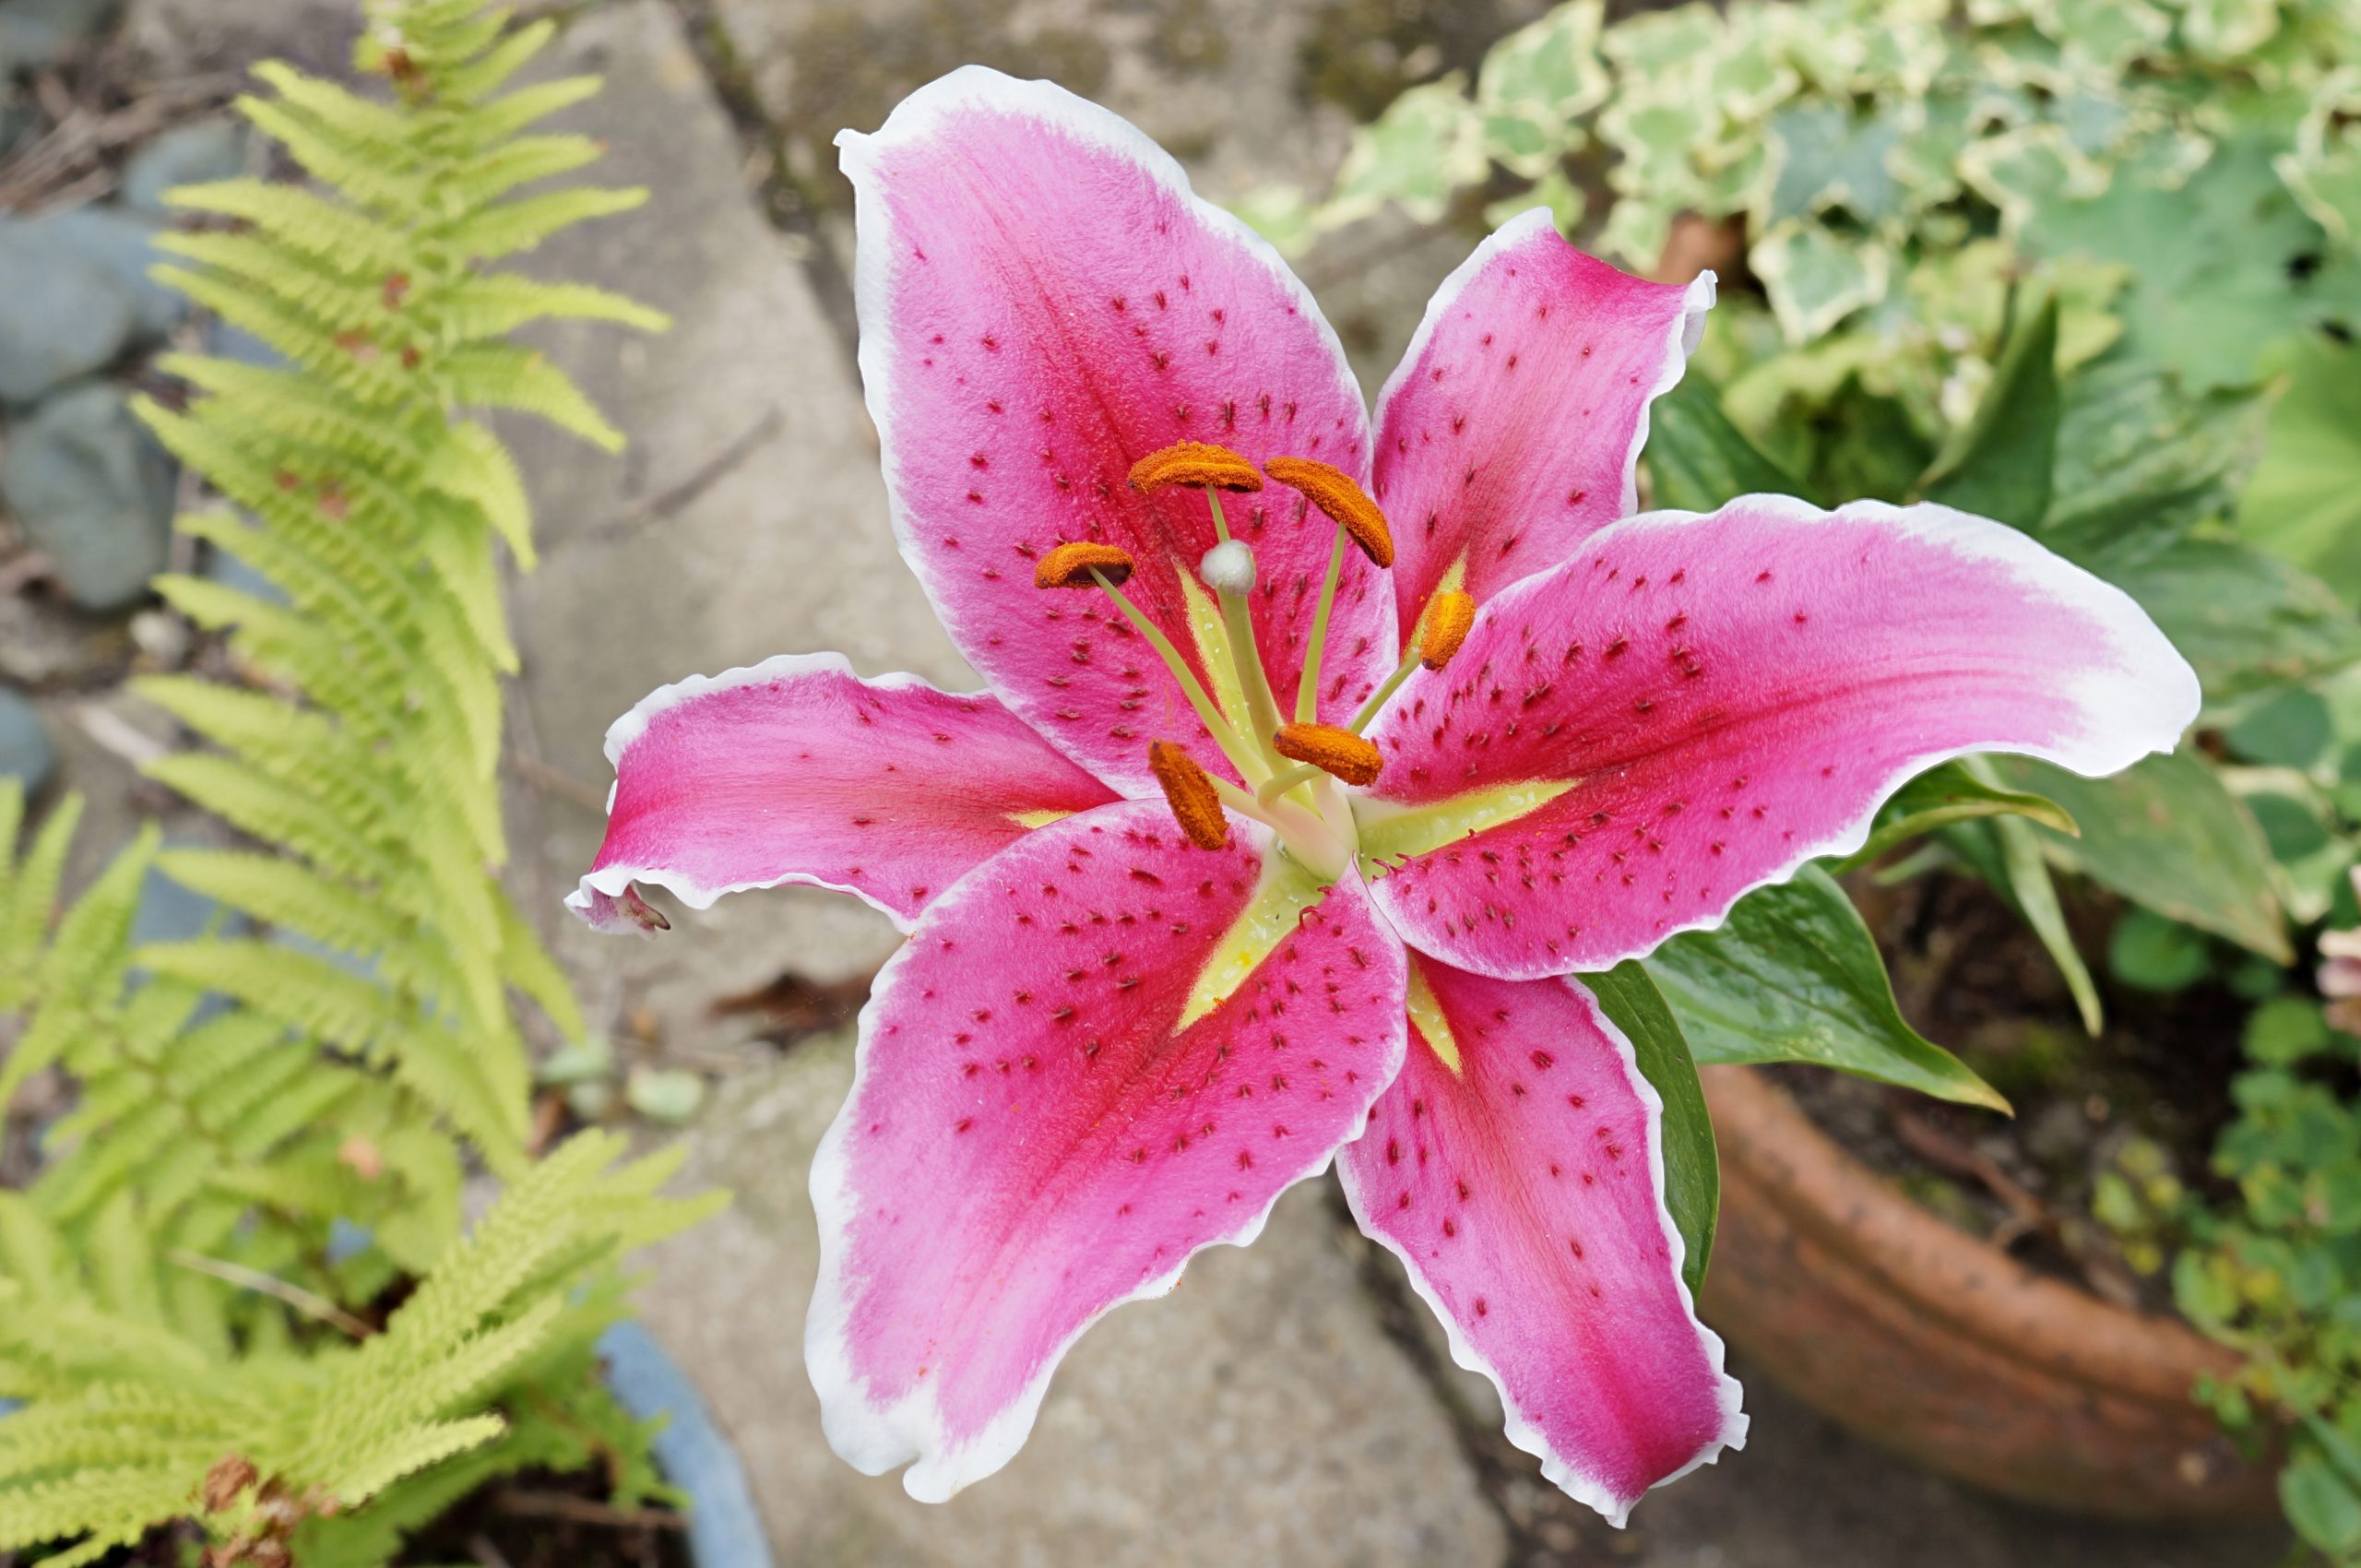 Star gazer lily pictures